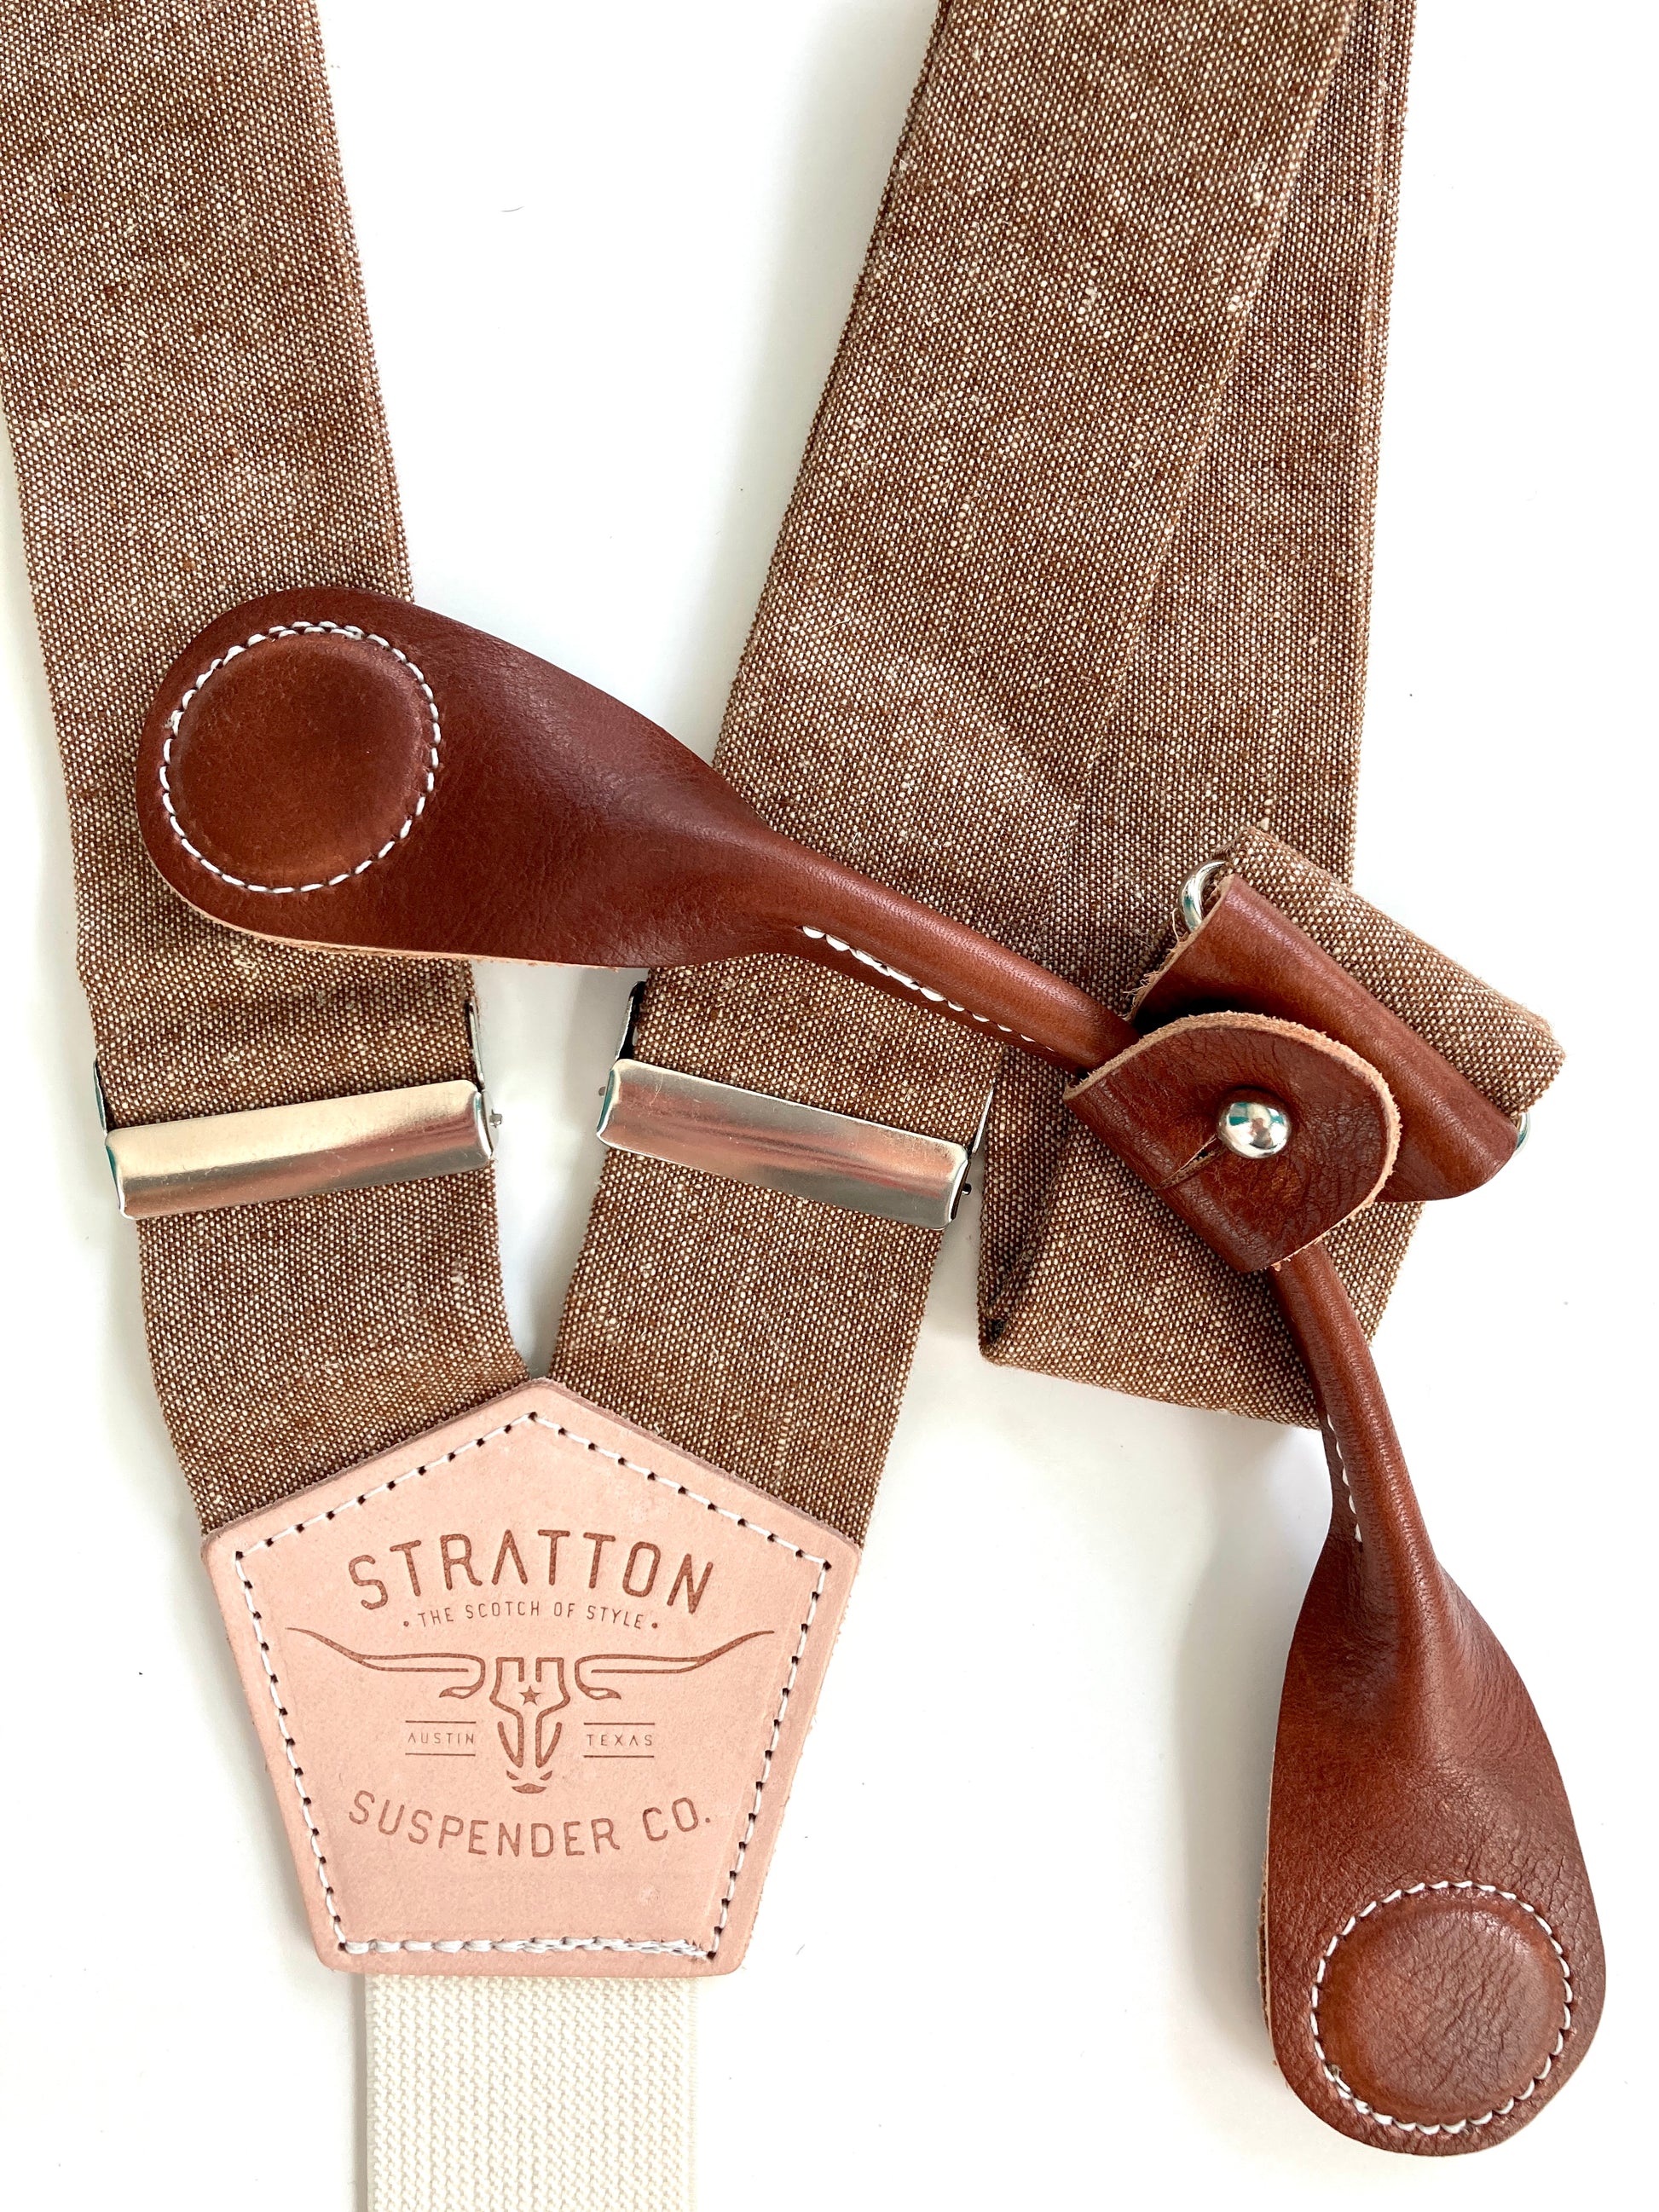 Stratton Suspender Co. features the Nutmeg (brown) linen suspenders on veg tan shoulder leather with cream colored elastic back strap for the Fall 2022 suspenders collection Magnetic Stratton Suspender clasps in Cognac Pontedero Italian leather hand-picked by Stratton Suspender Co.